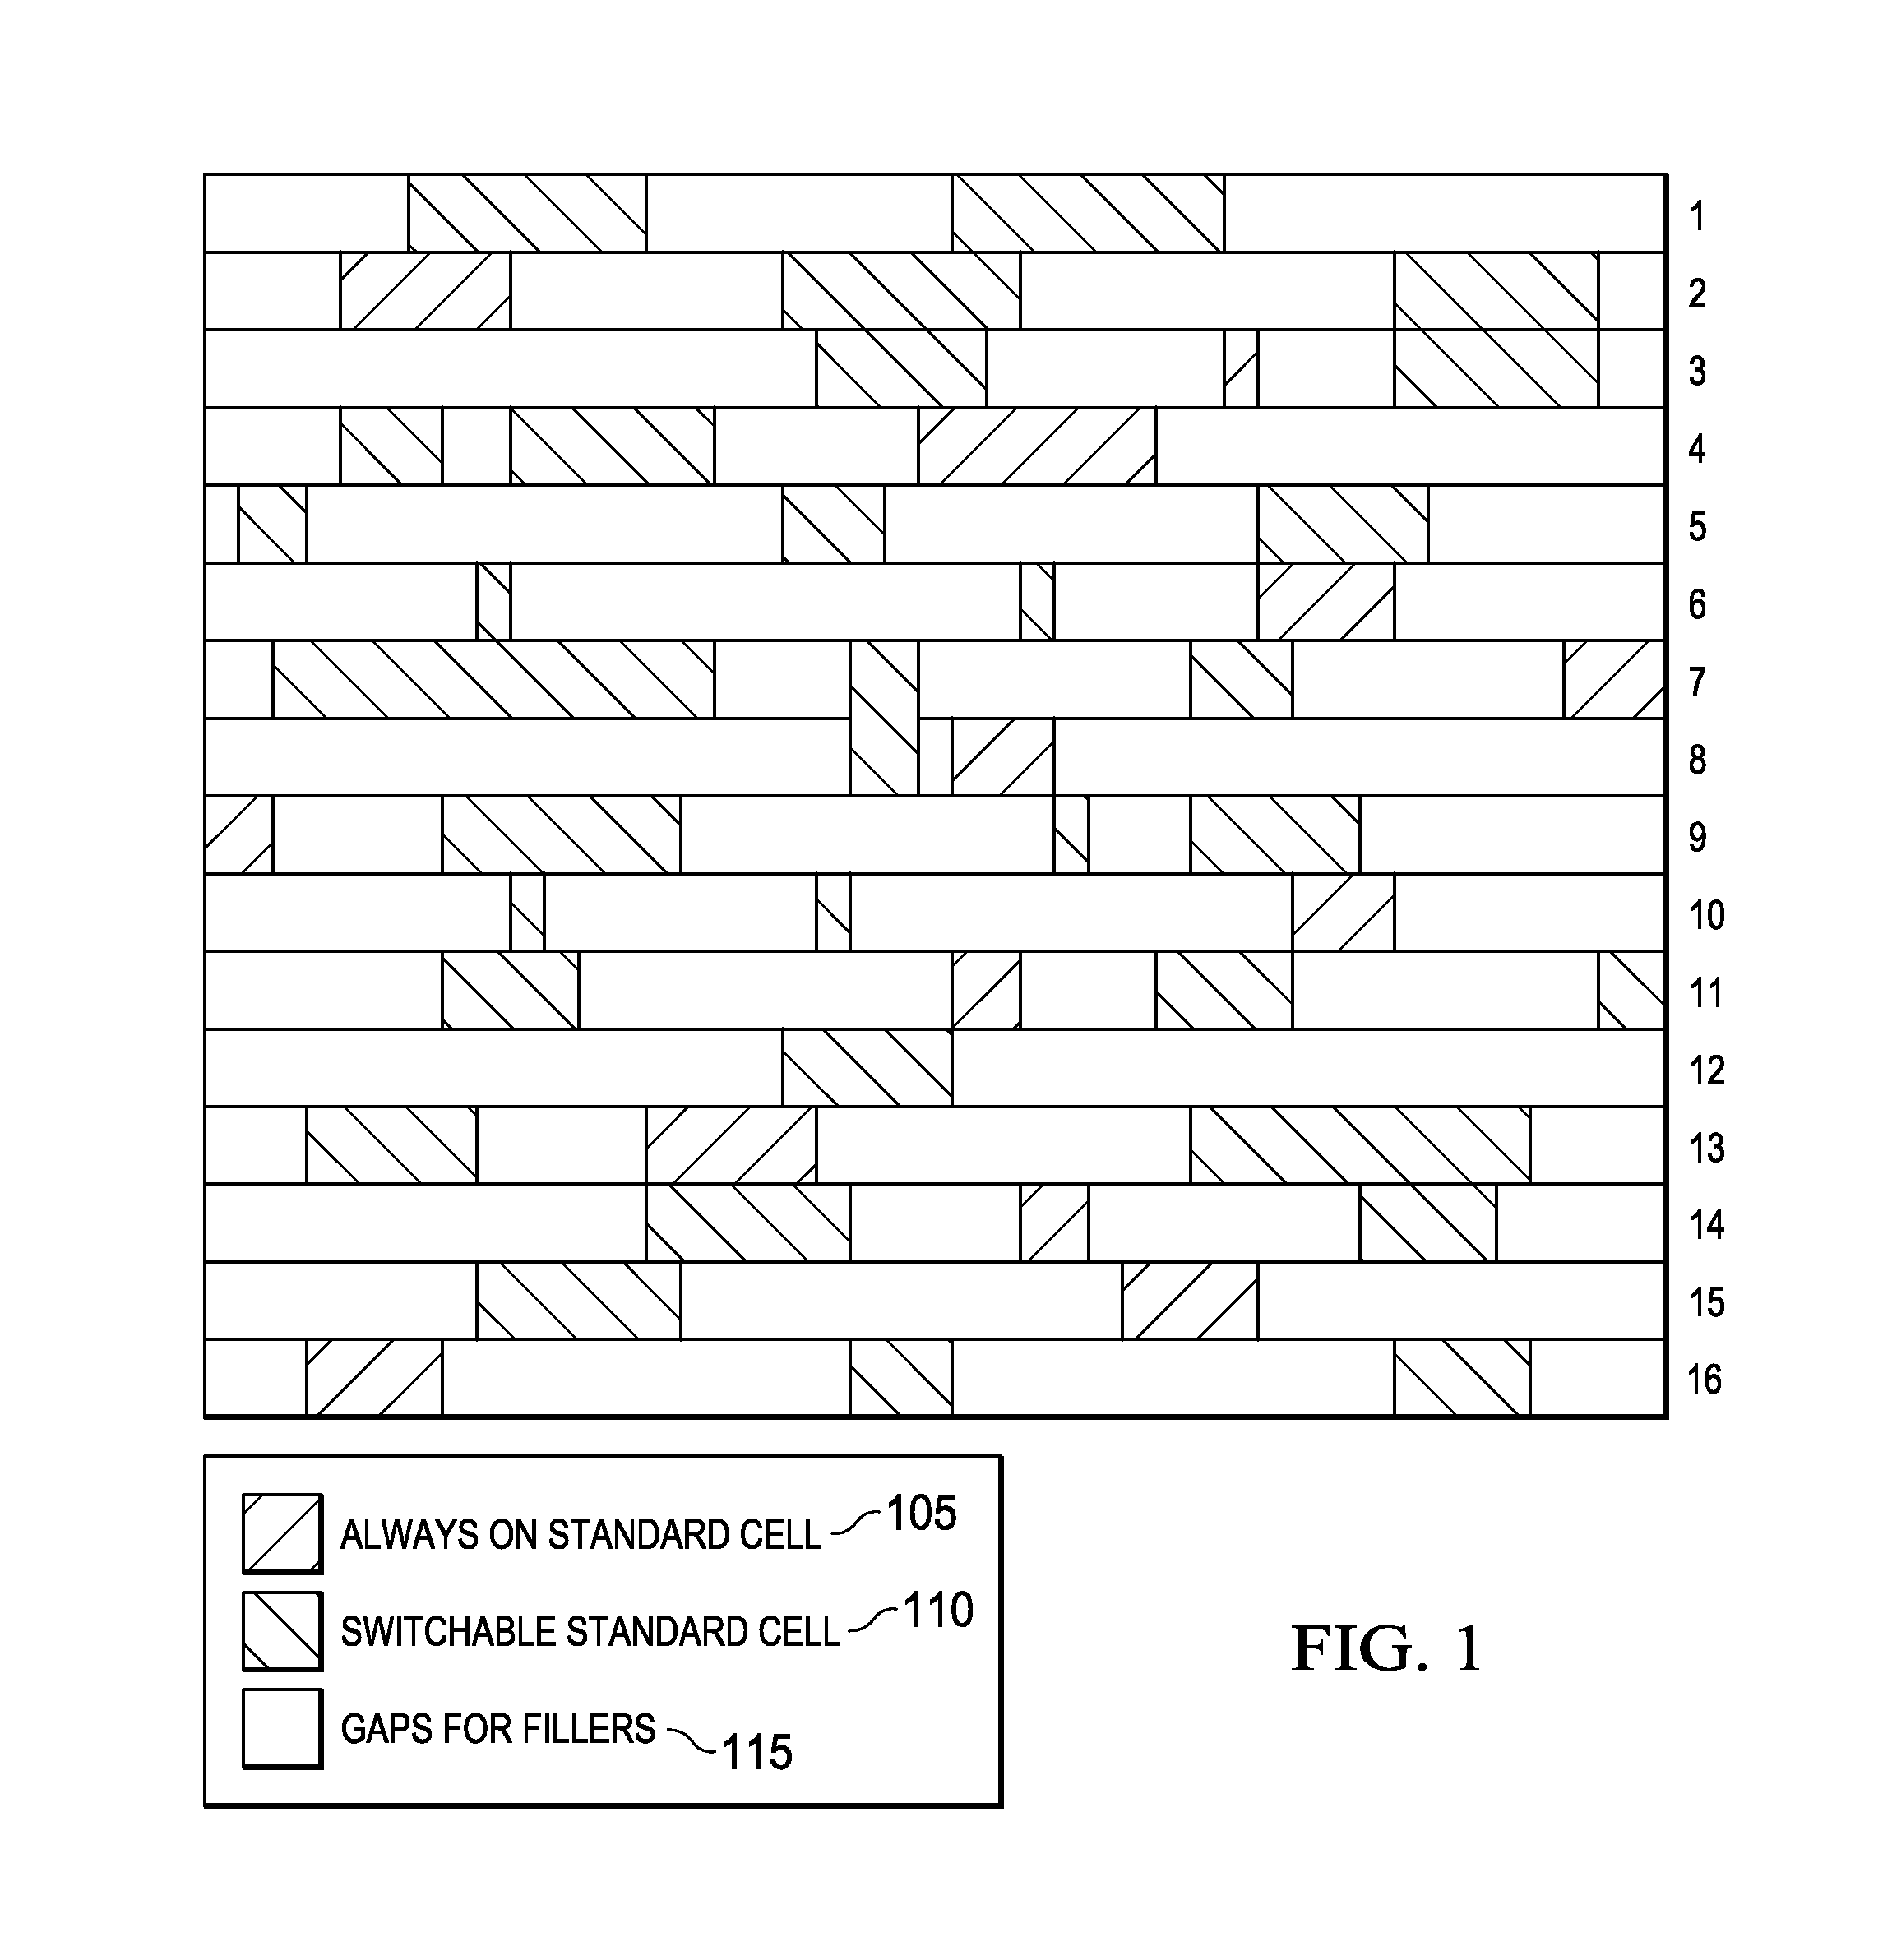 Filler insertion in circuit layout